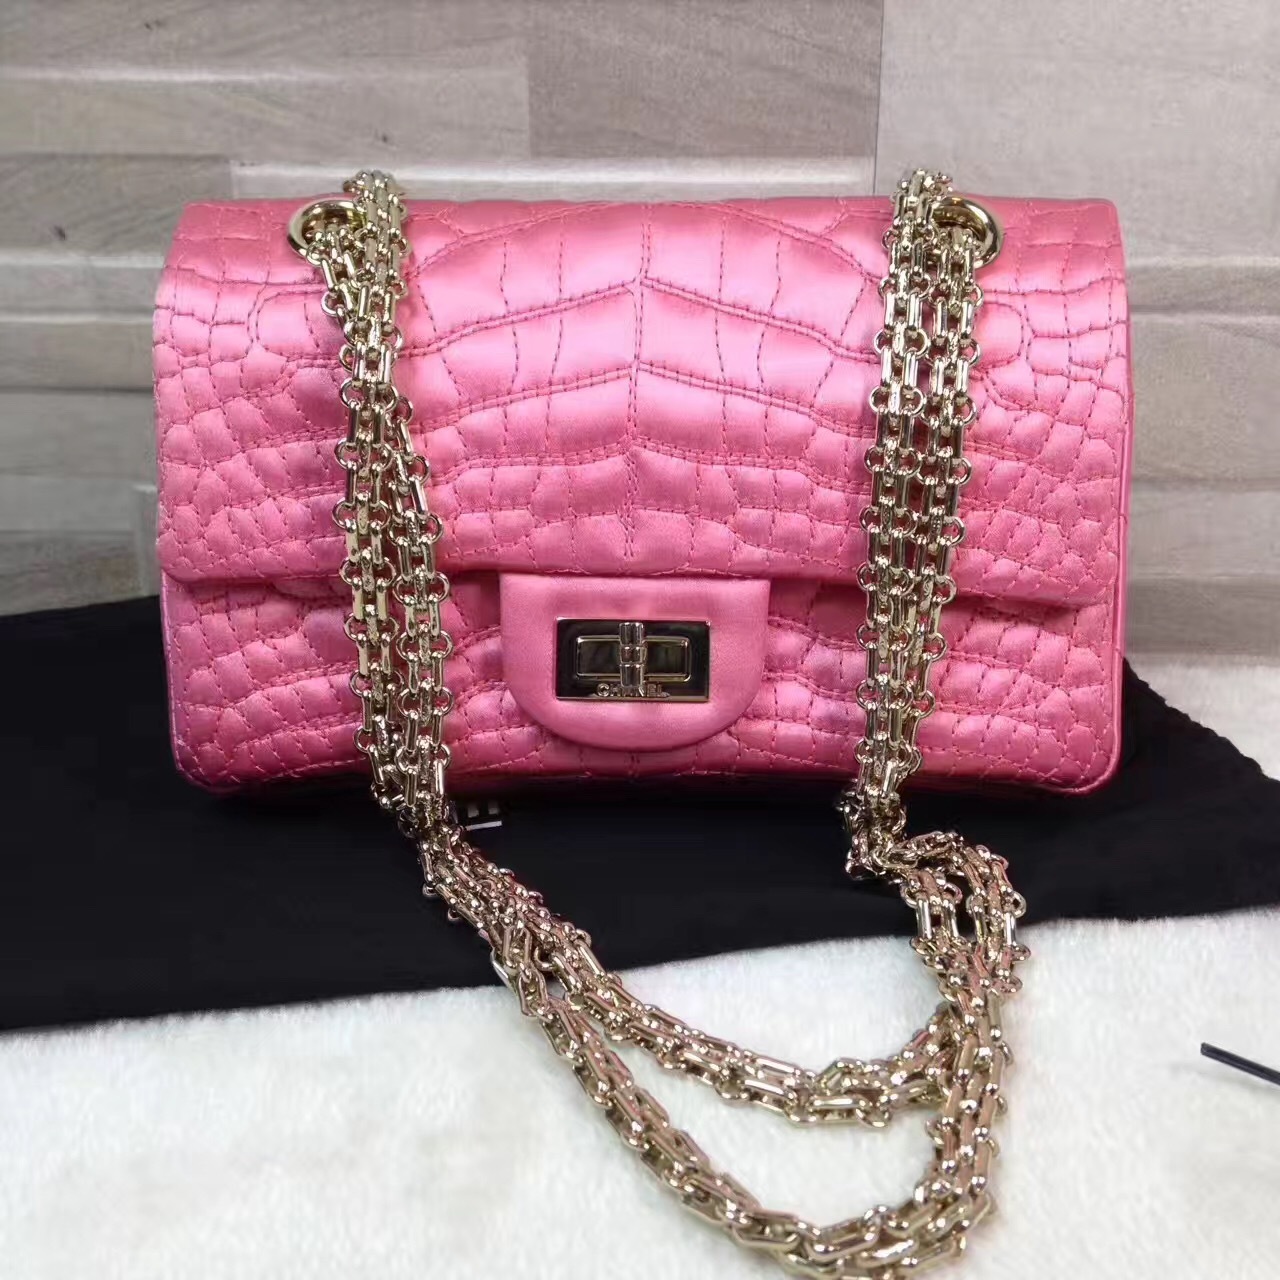 Authentic Chanel Classic 2.55 Reissue Mini and similar items